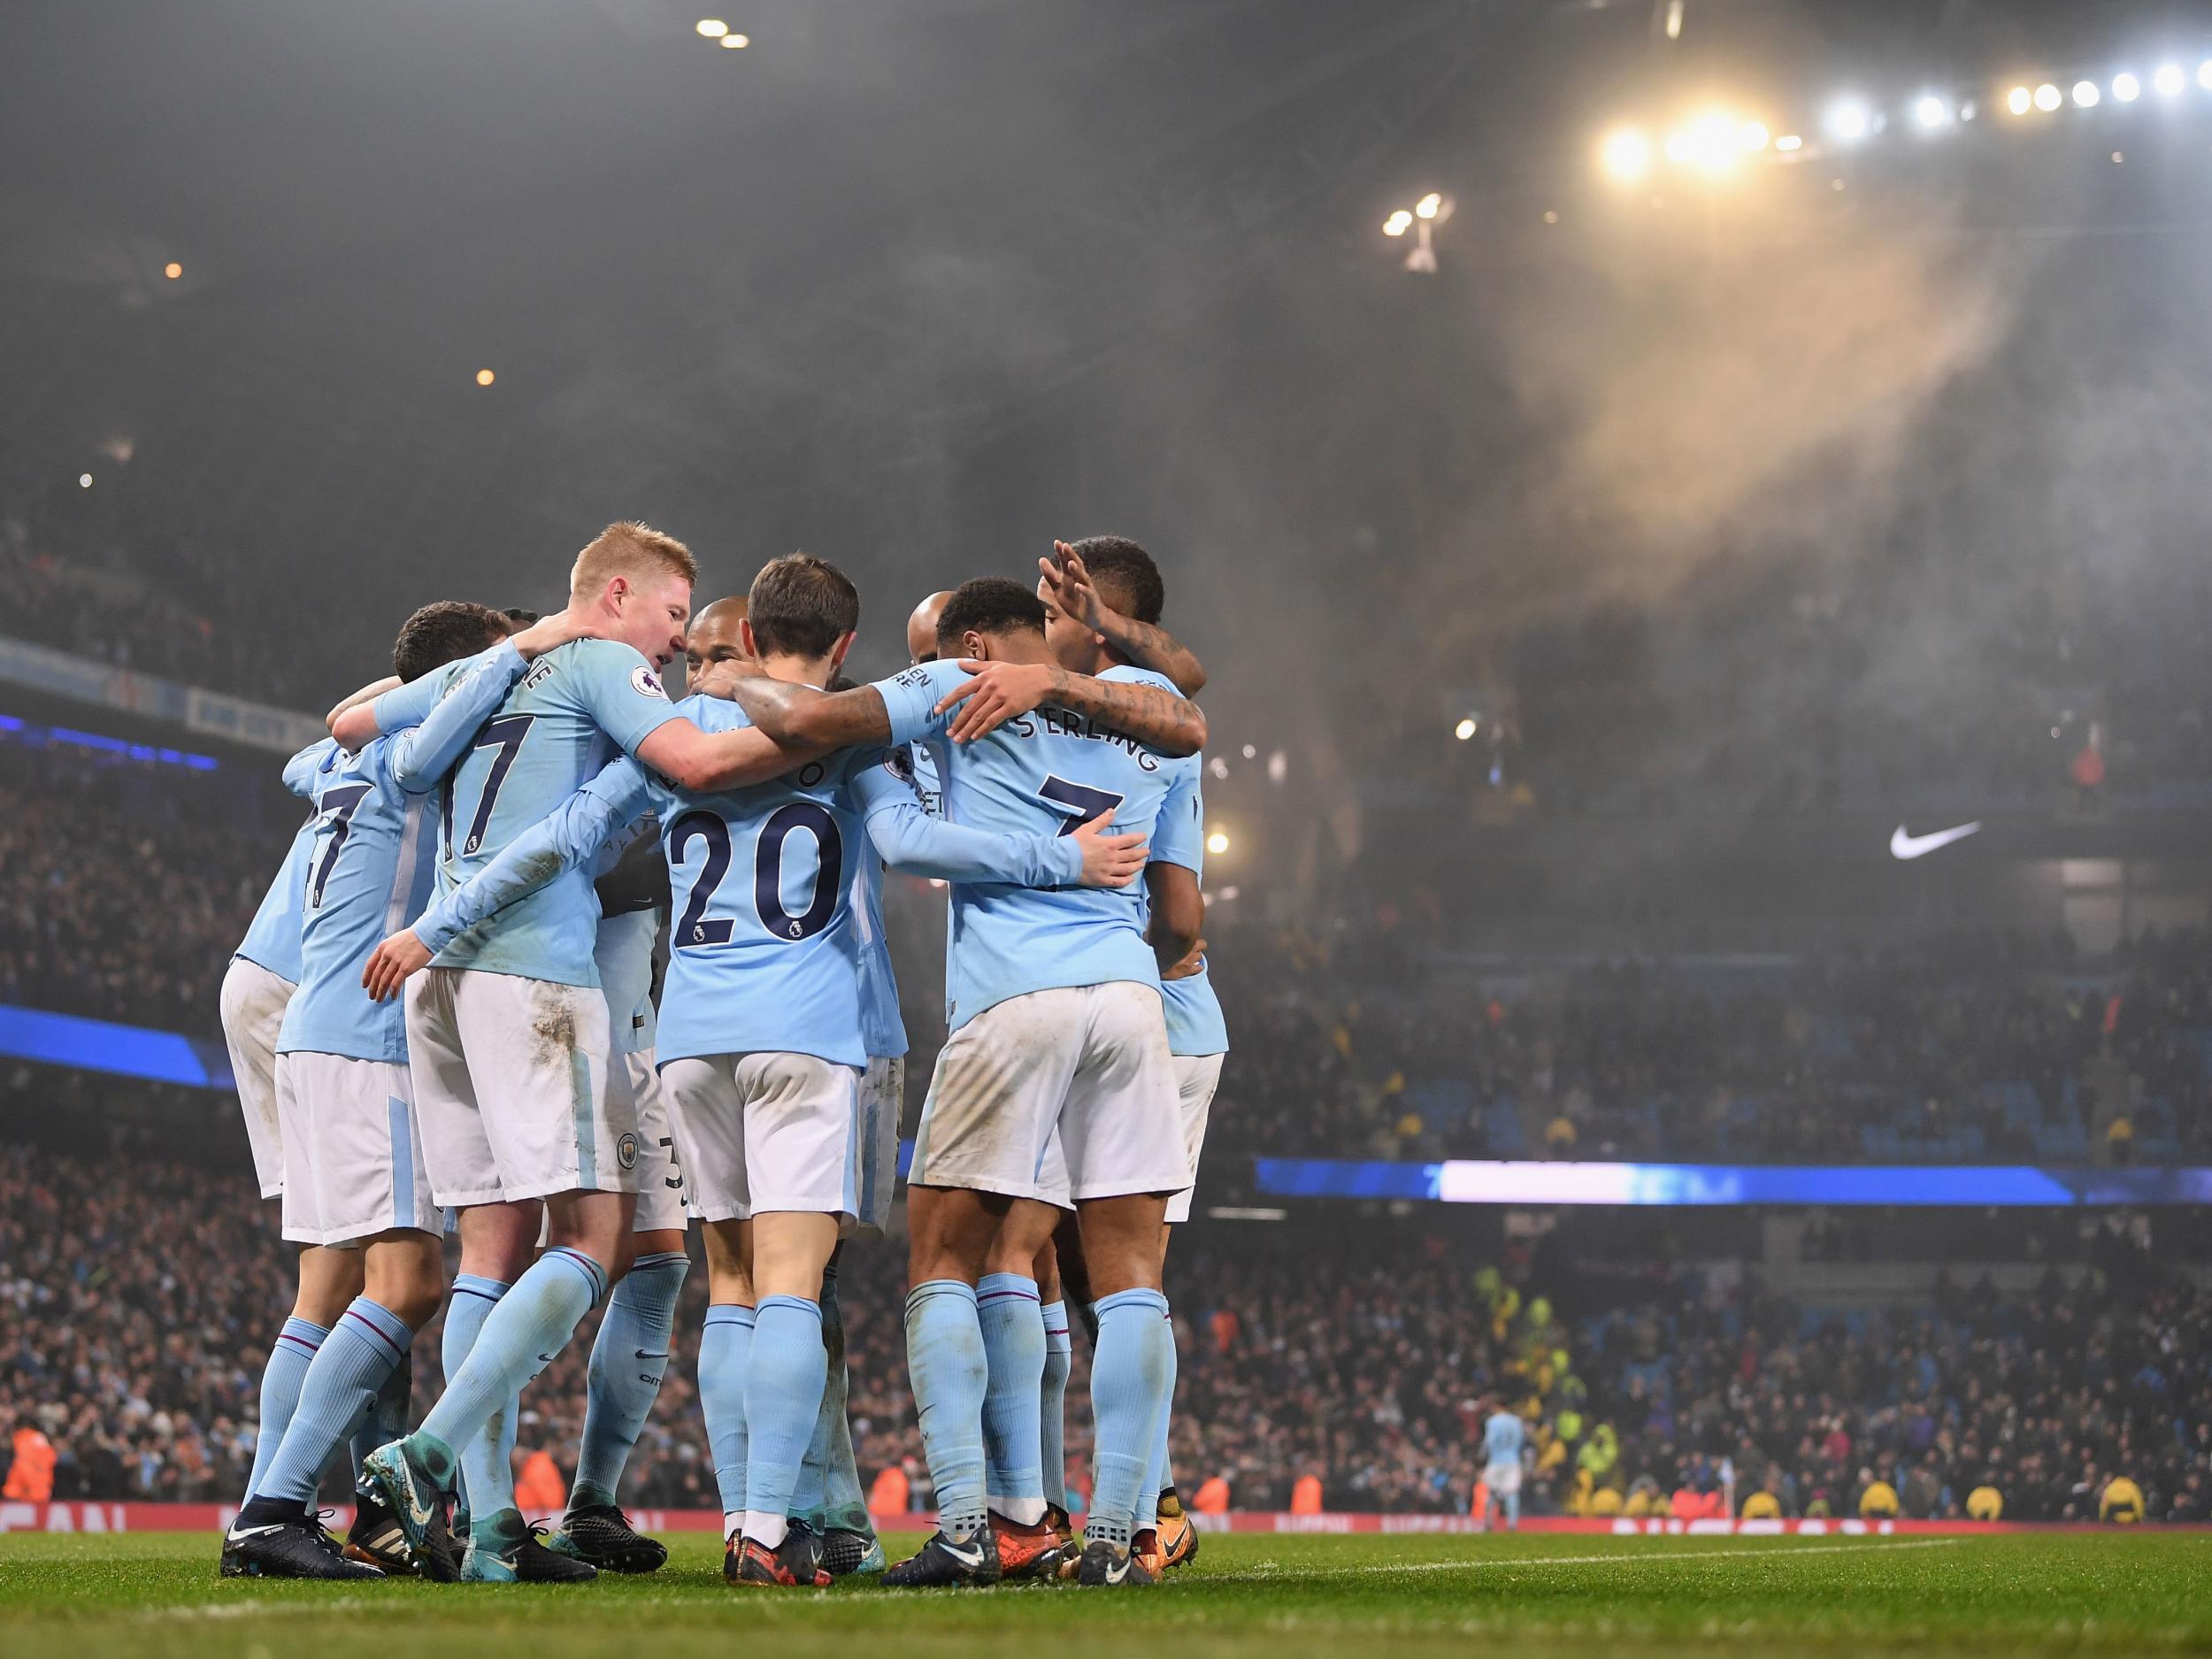 Manchester City are now the most powerful club in the world in terms of finance